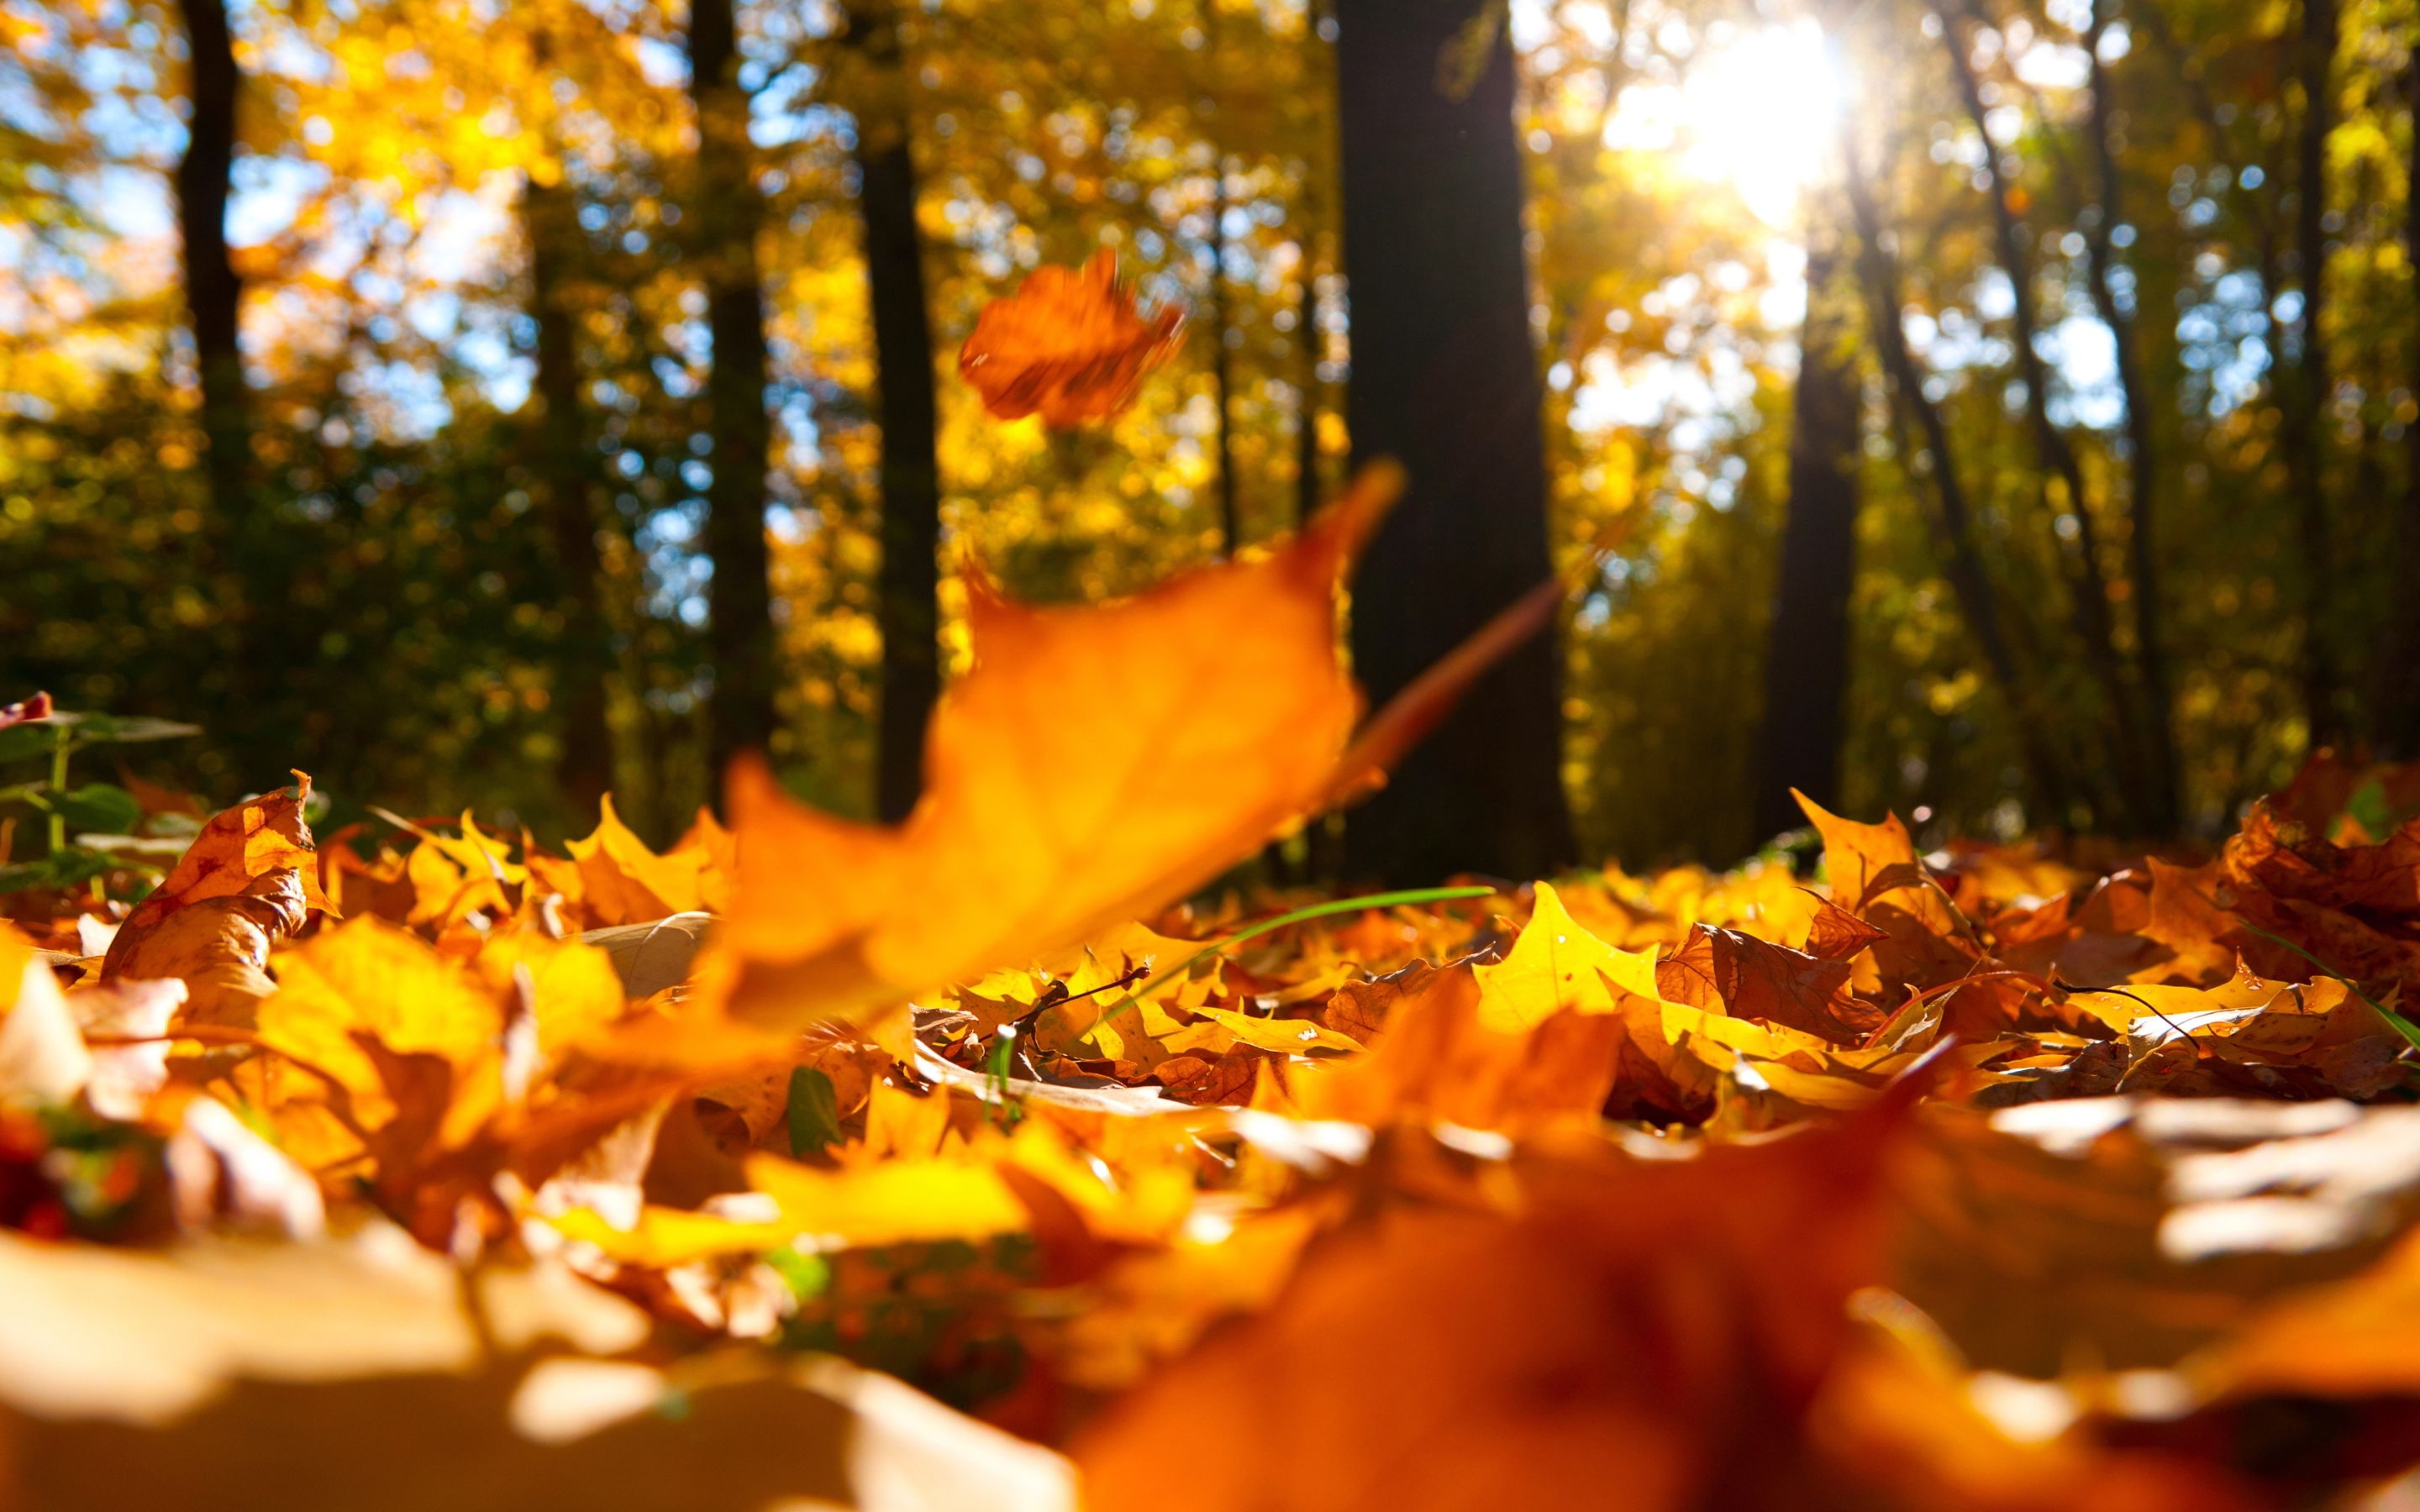 Free photo: Fallen Autumn Leaves, Leaves, The